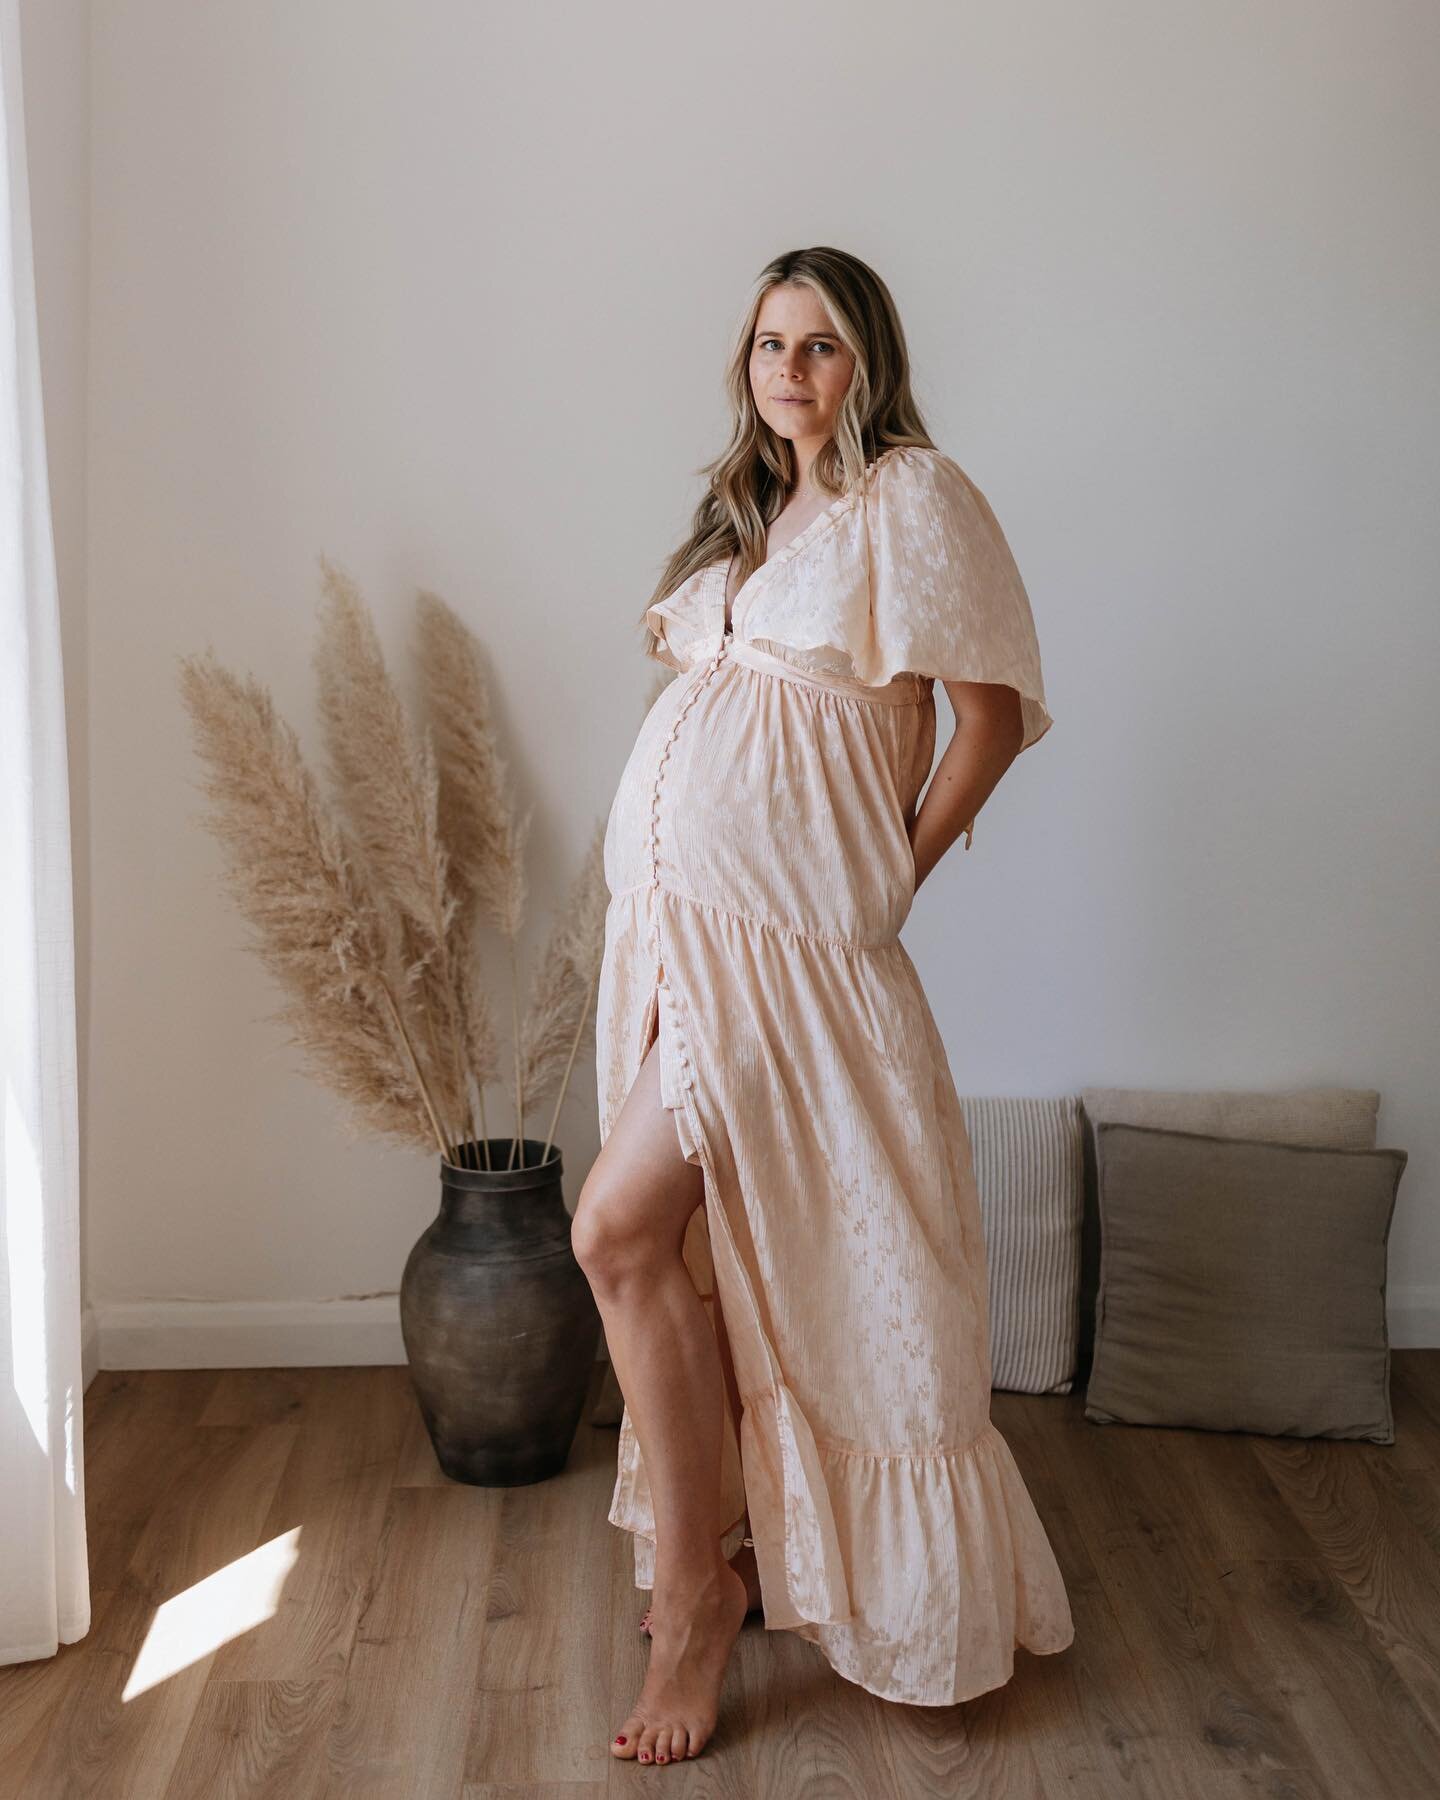 It&rsquo;s been a while since I showed my own face on here, so hi everyone 🙋🏼&zwj;♀️
I really thought I&rsquo;d document this pregnancy a lot more, especially given that it&rsquo;s what I do for a job, but these past few months have flown by and th